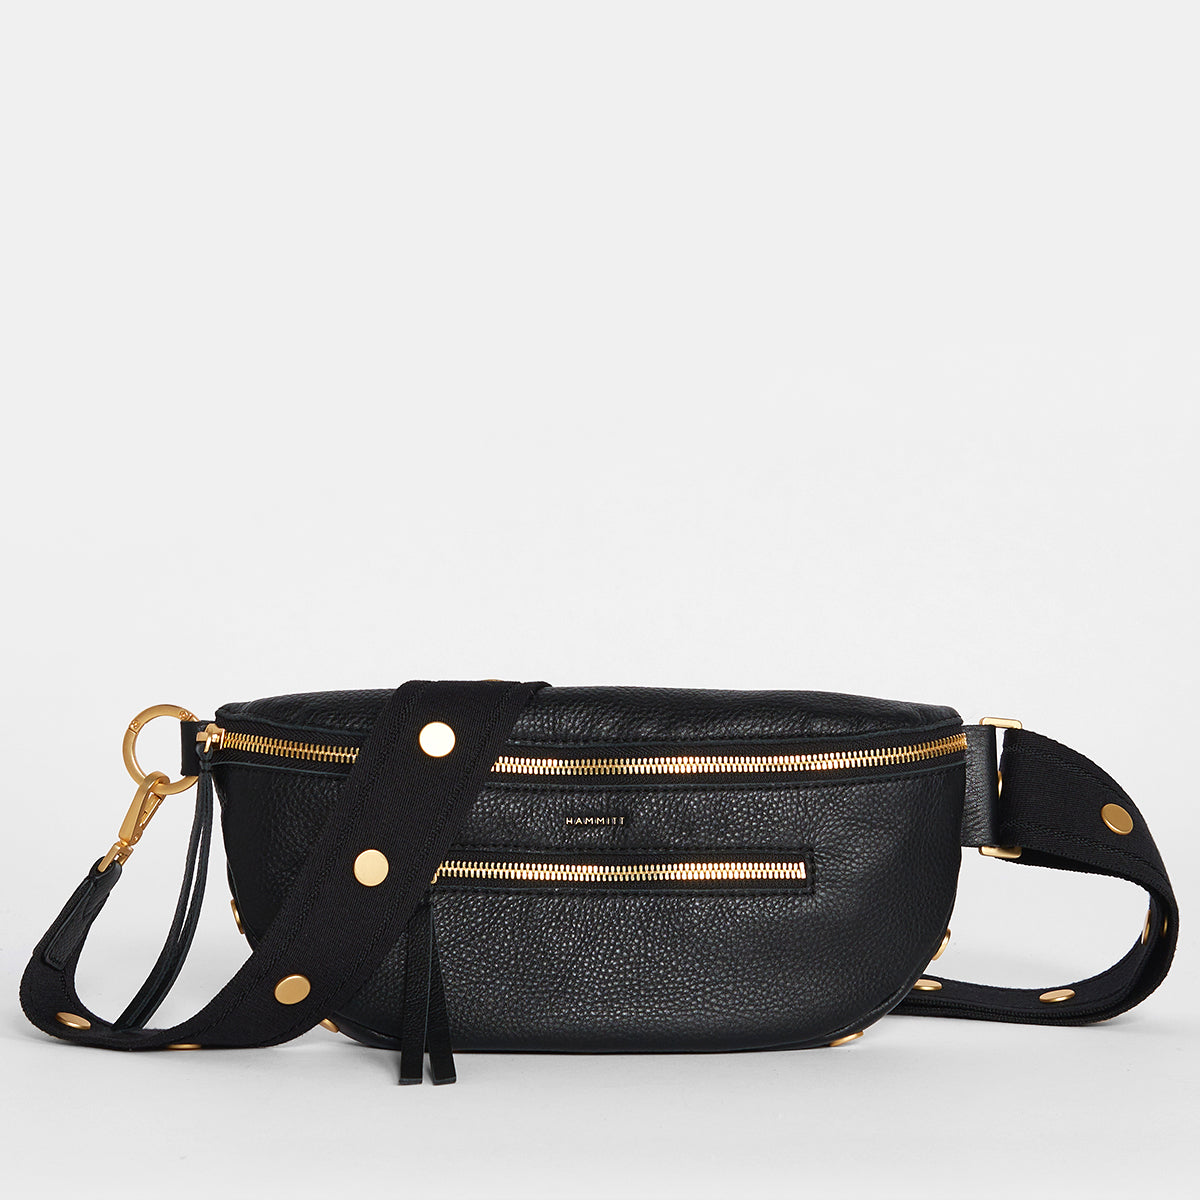 Charles-Crossbody-Revival-Collection-Front-View-2